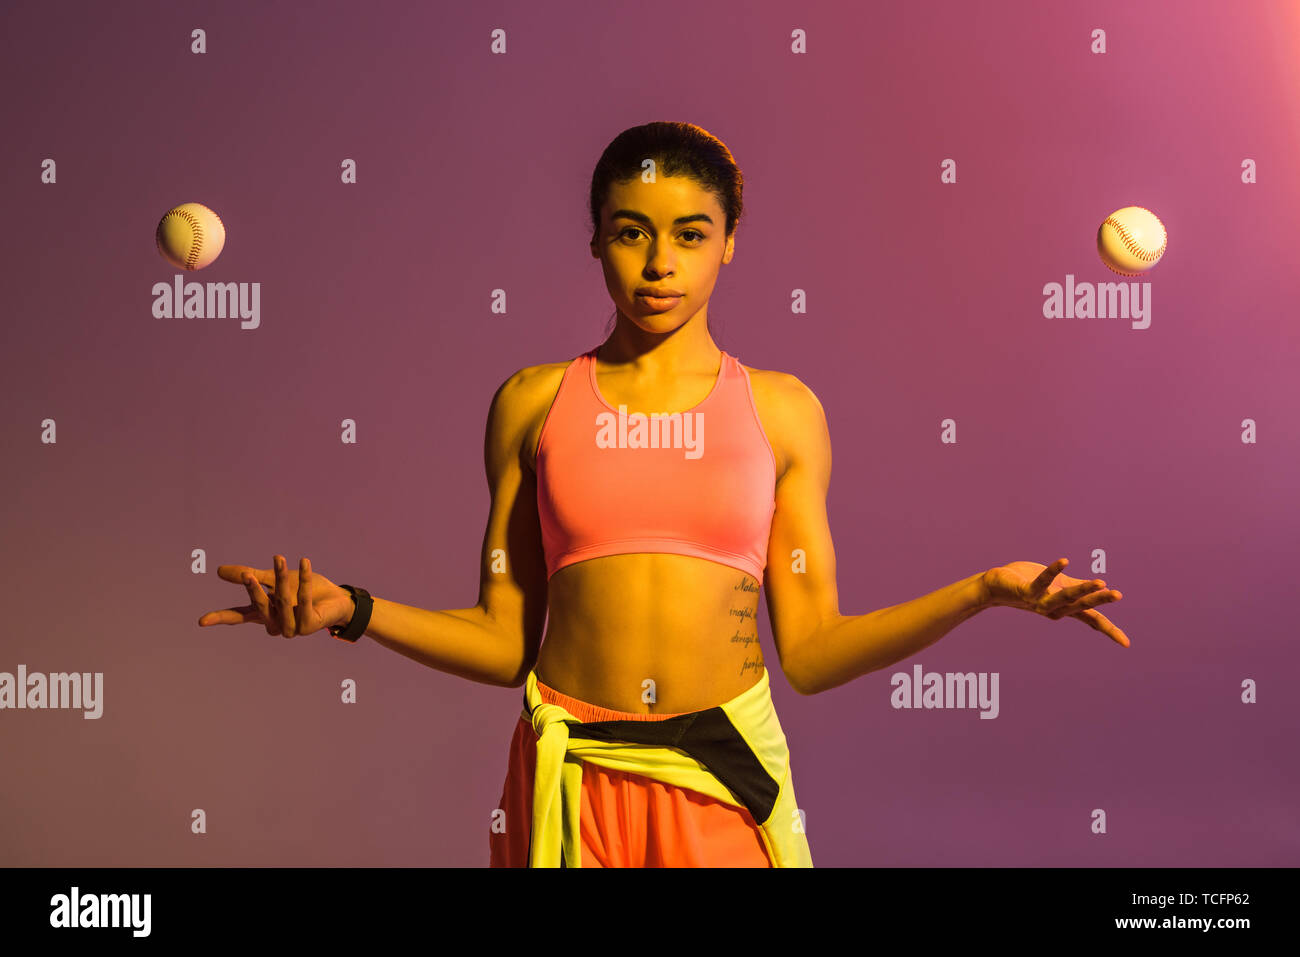 attractive african american girl in pink sports bra and shorts juggle with balls on purple background with gradient Stock Photo